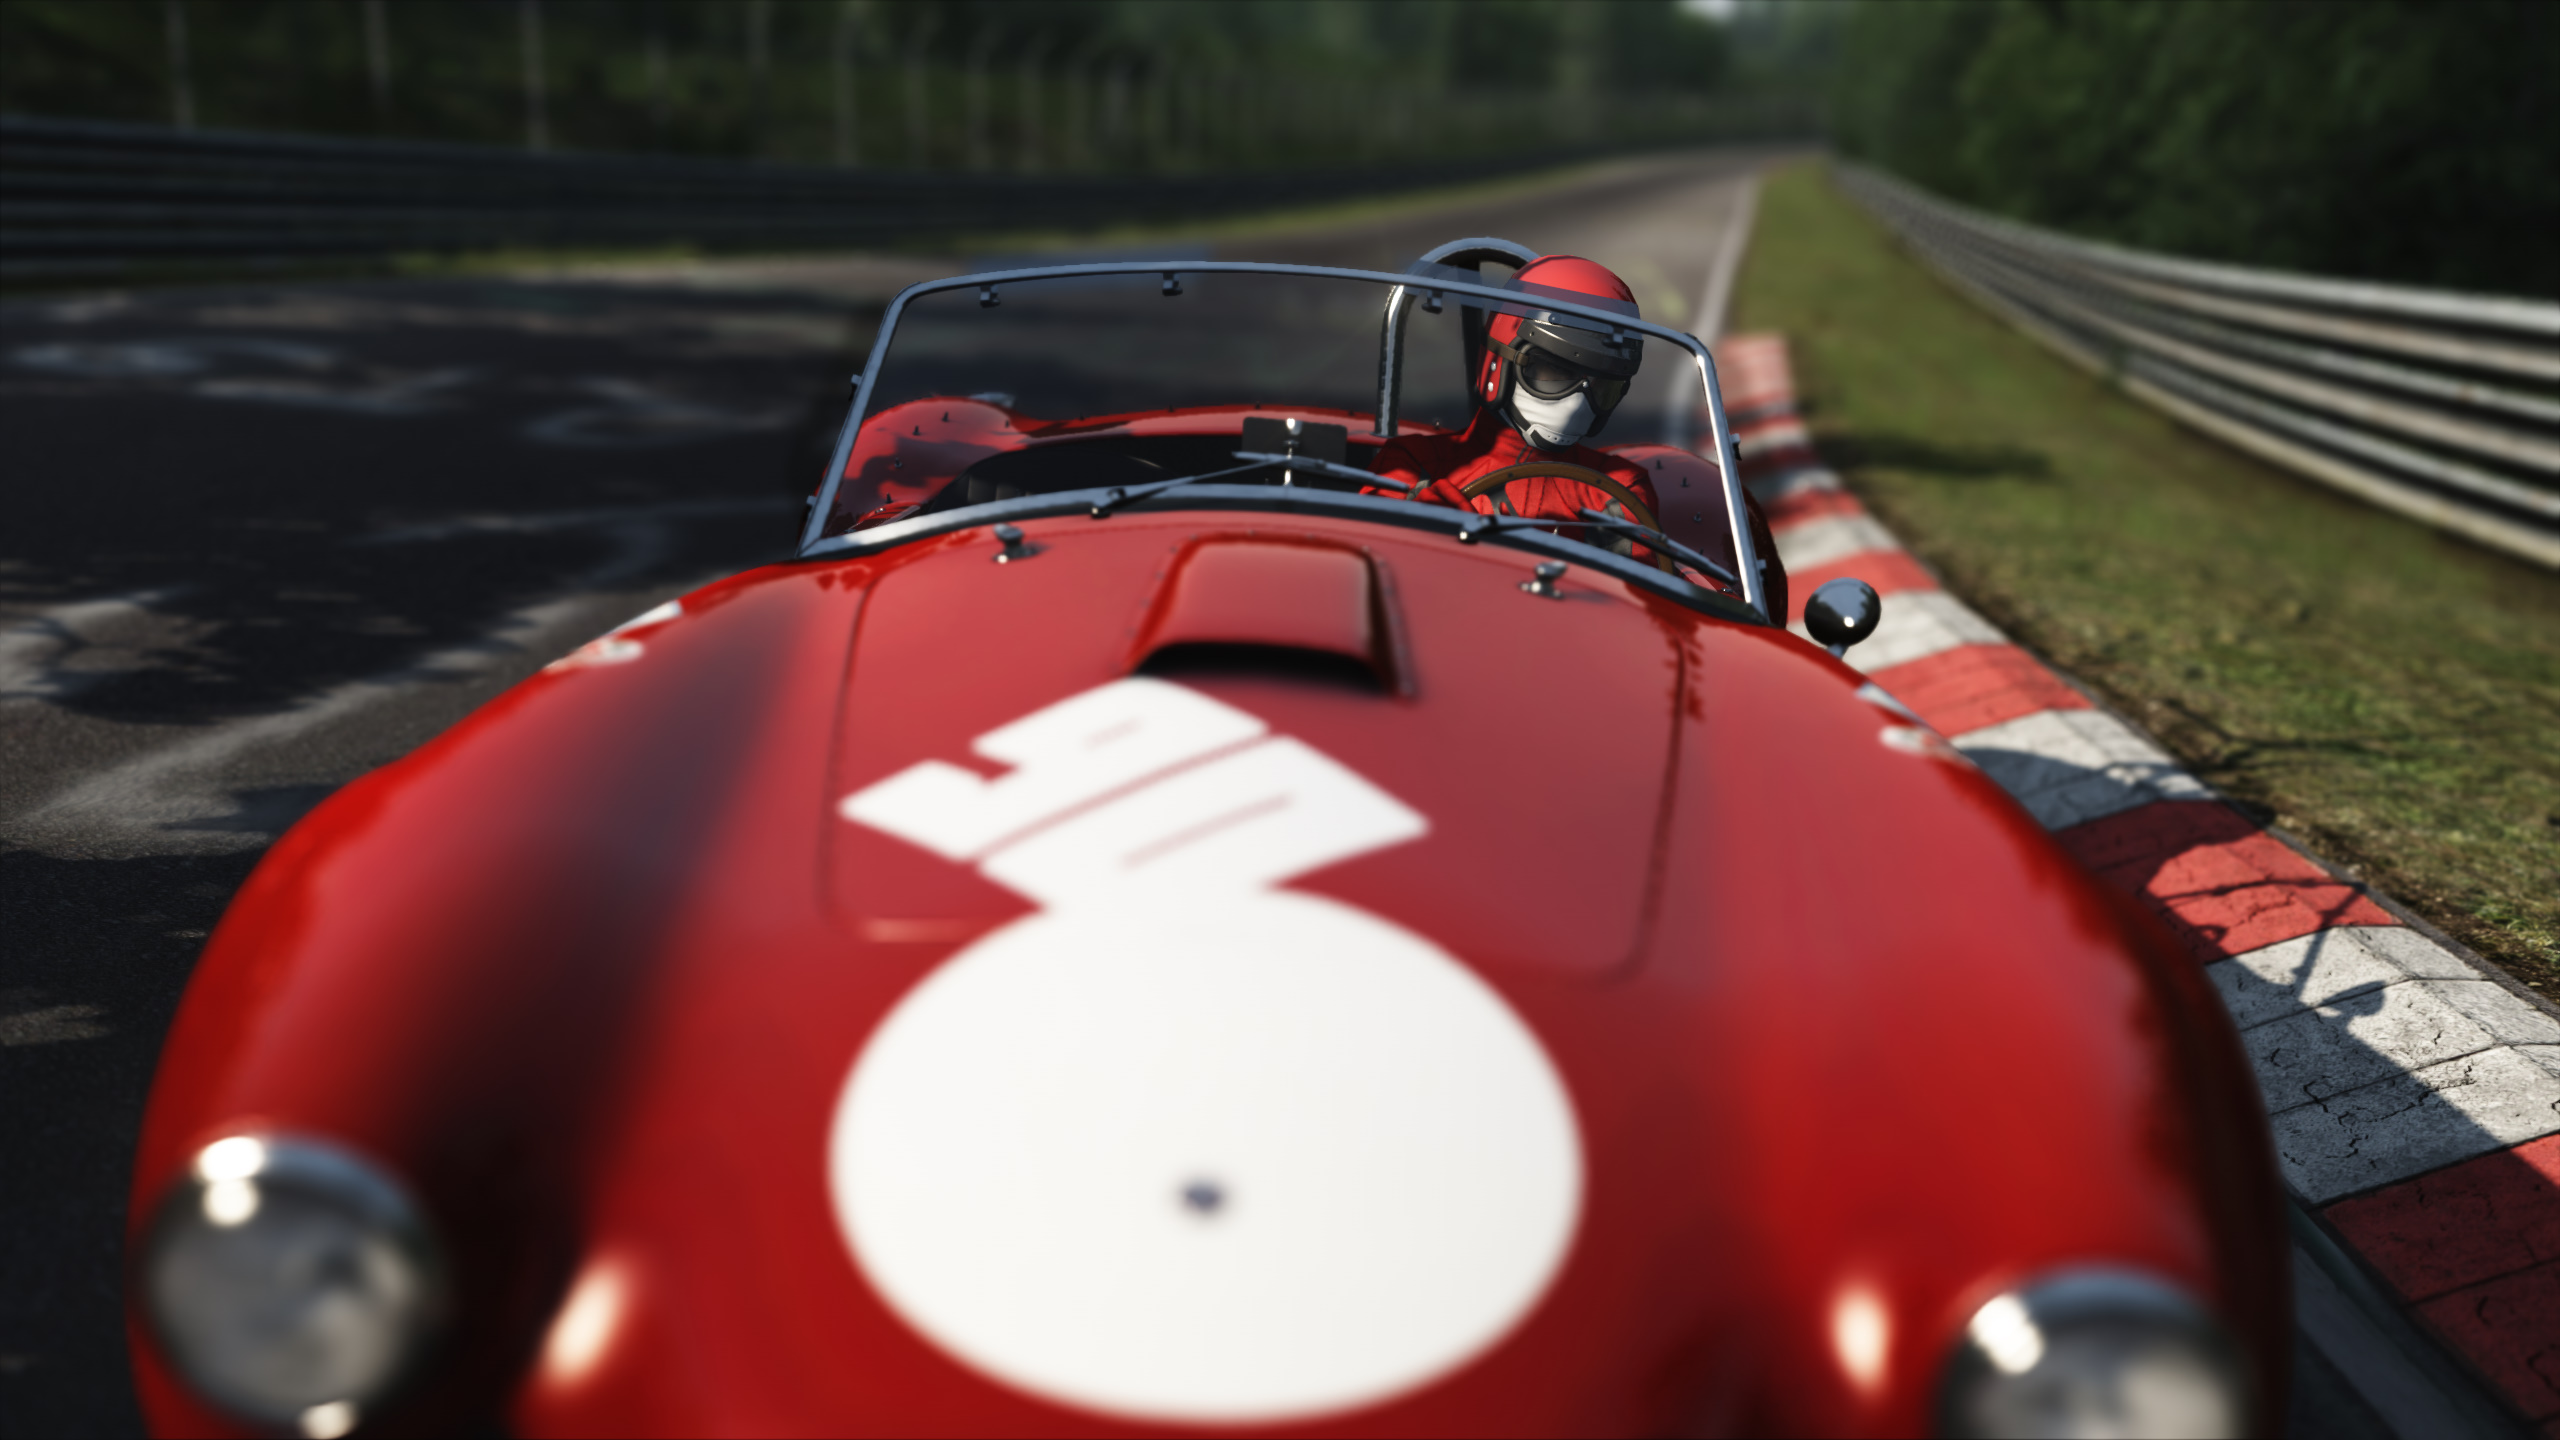 Assetto Corsa Car Racing Shelby Cobra 427 S C Video Game 2560x1440